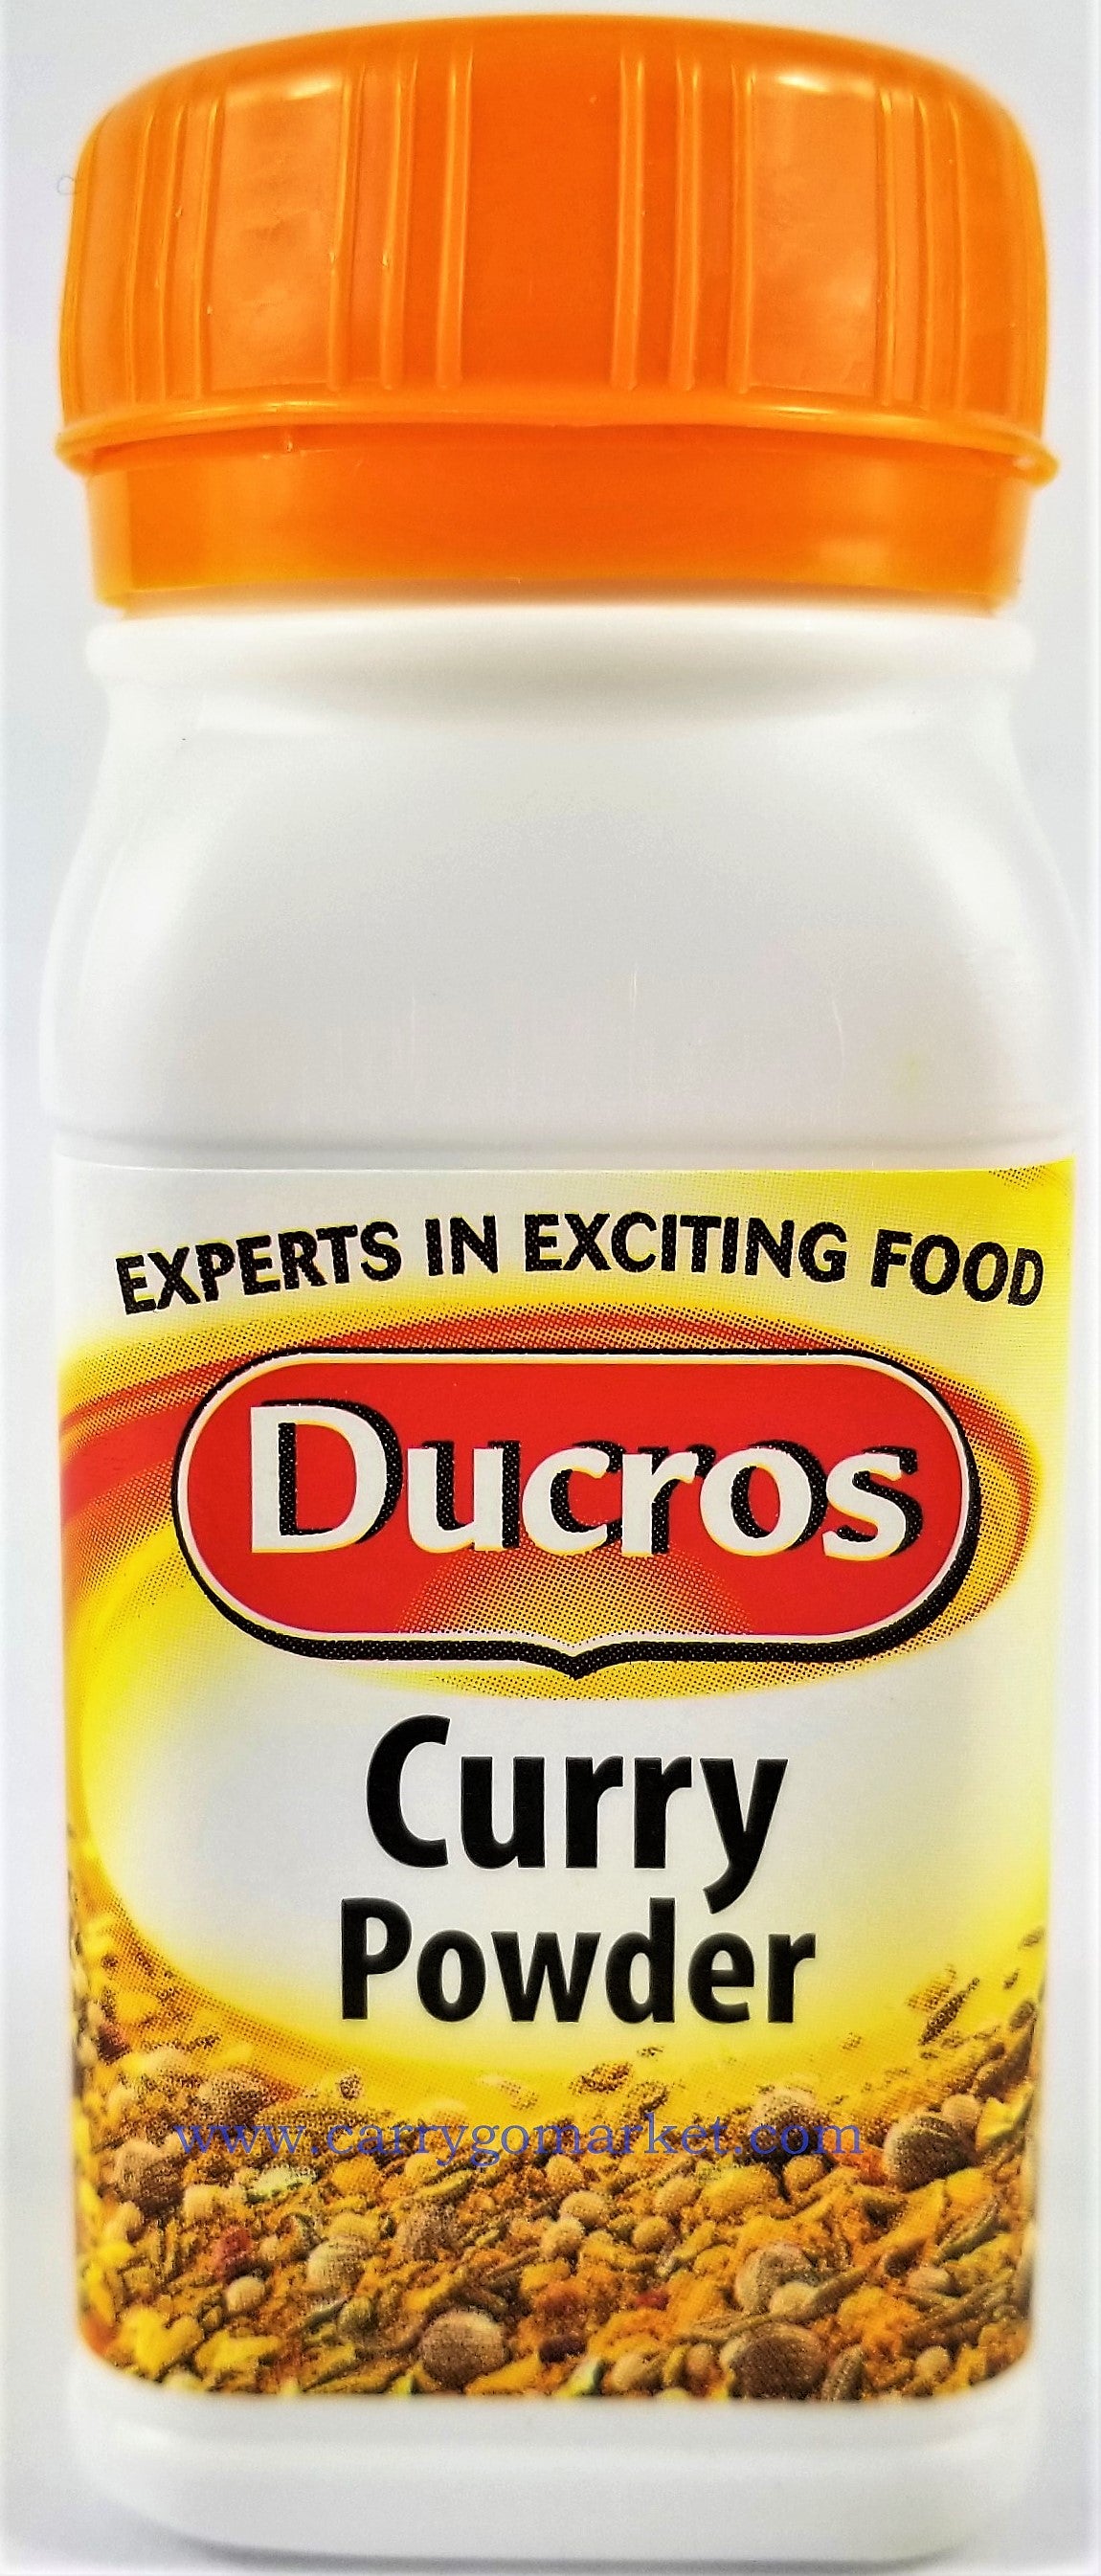 CURRY POUDRE 47G DUCROS, Odoo